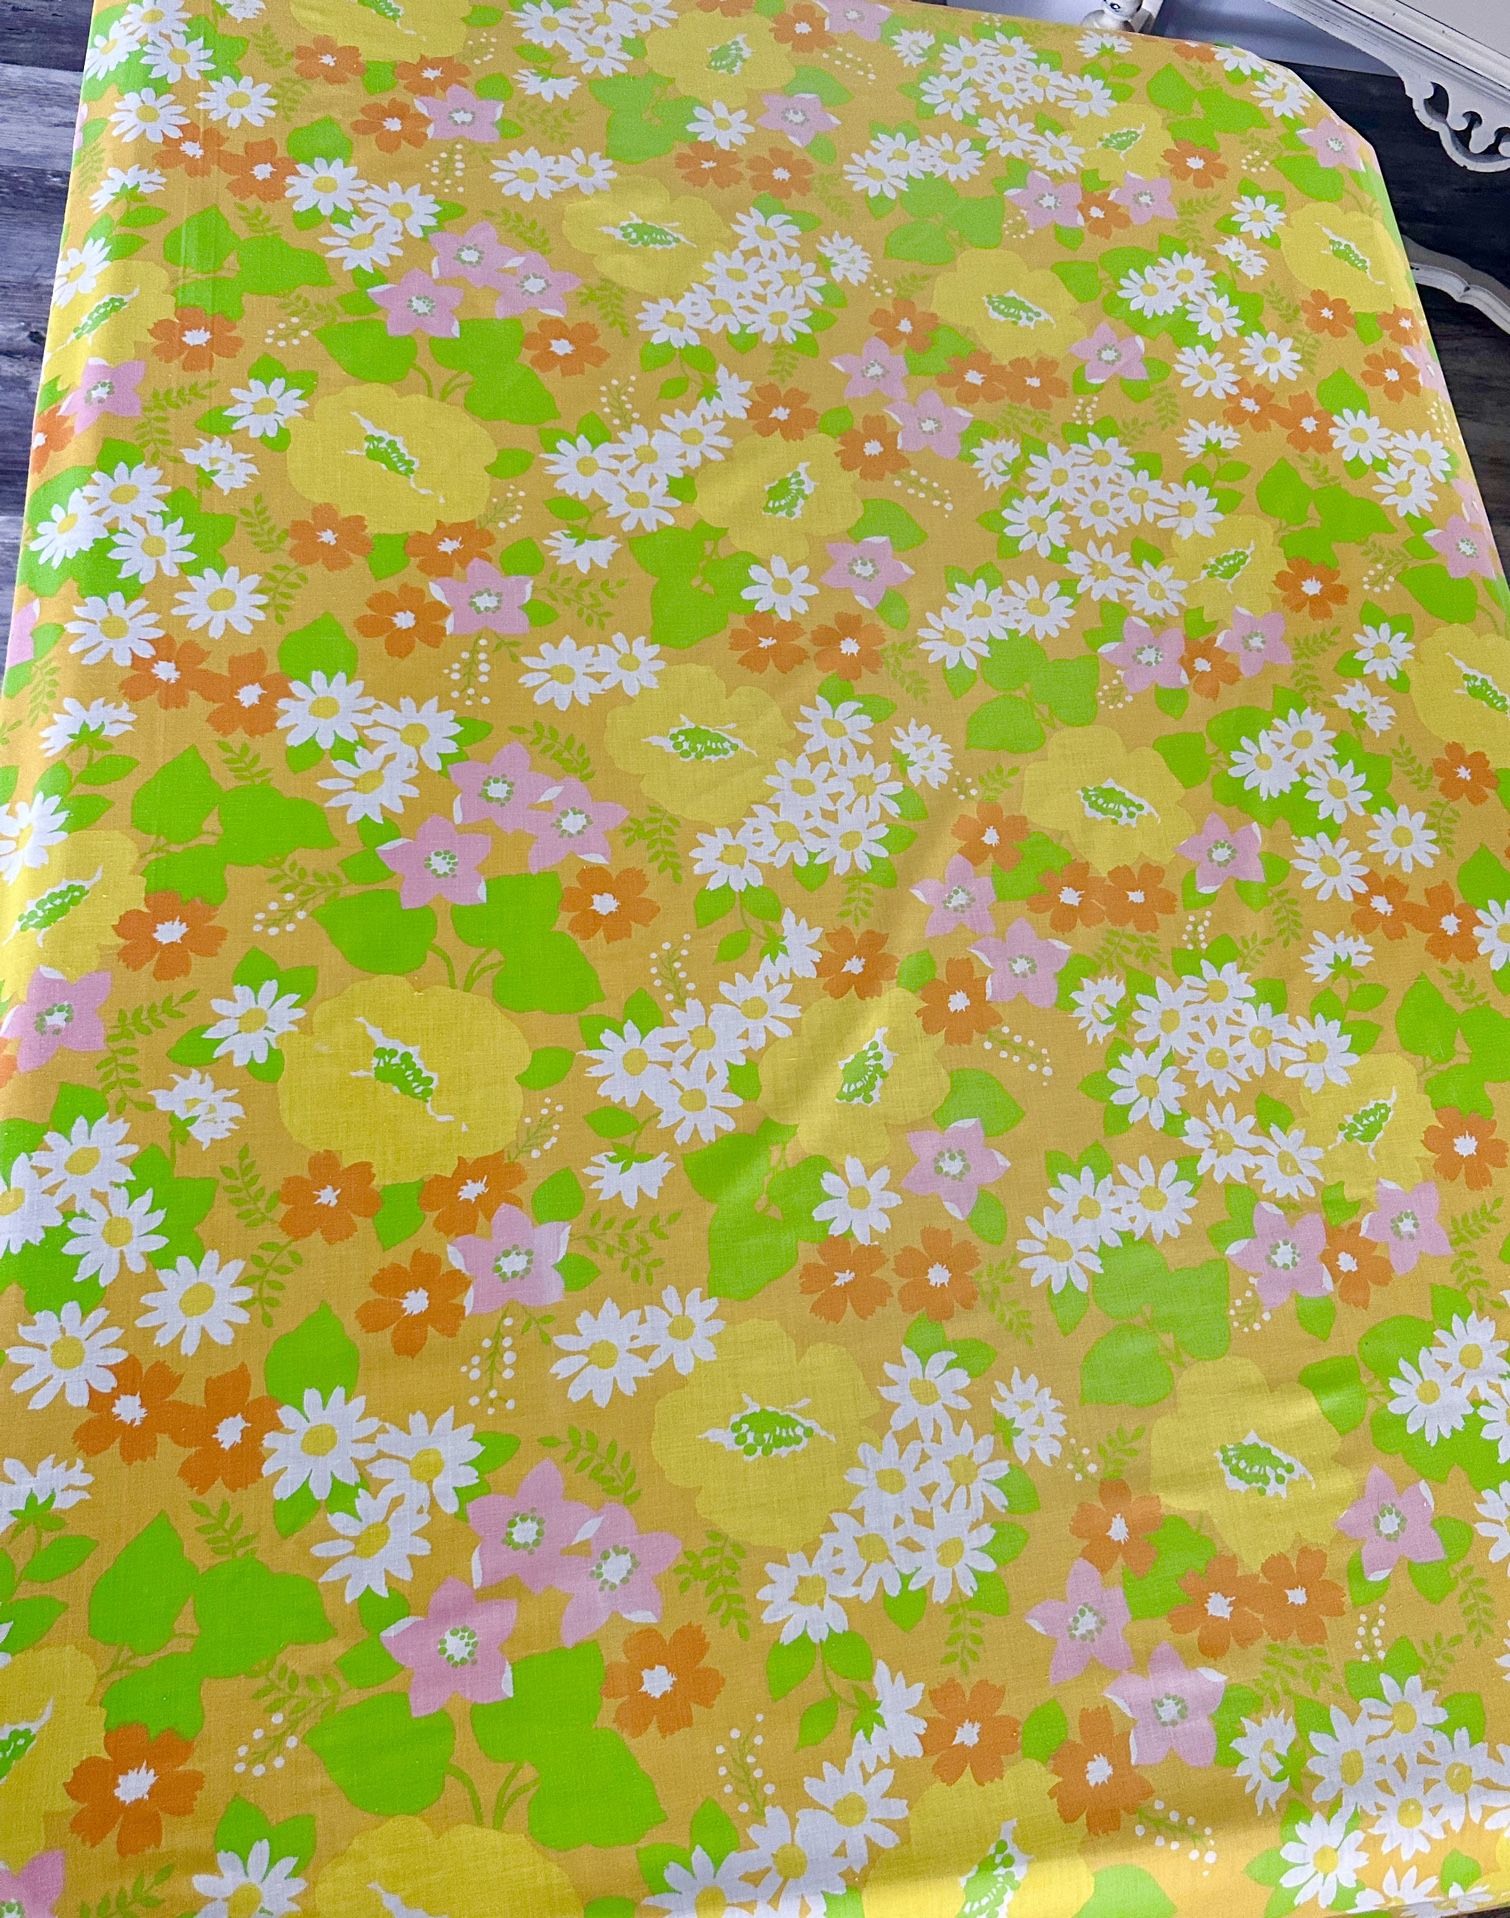 Vintage Wamsutta Superlin twin size fitted sheet 50/50 muslin. Bright groovy colors and  flower power design.  No holes, rips or stains. 